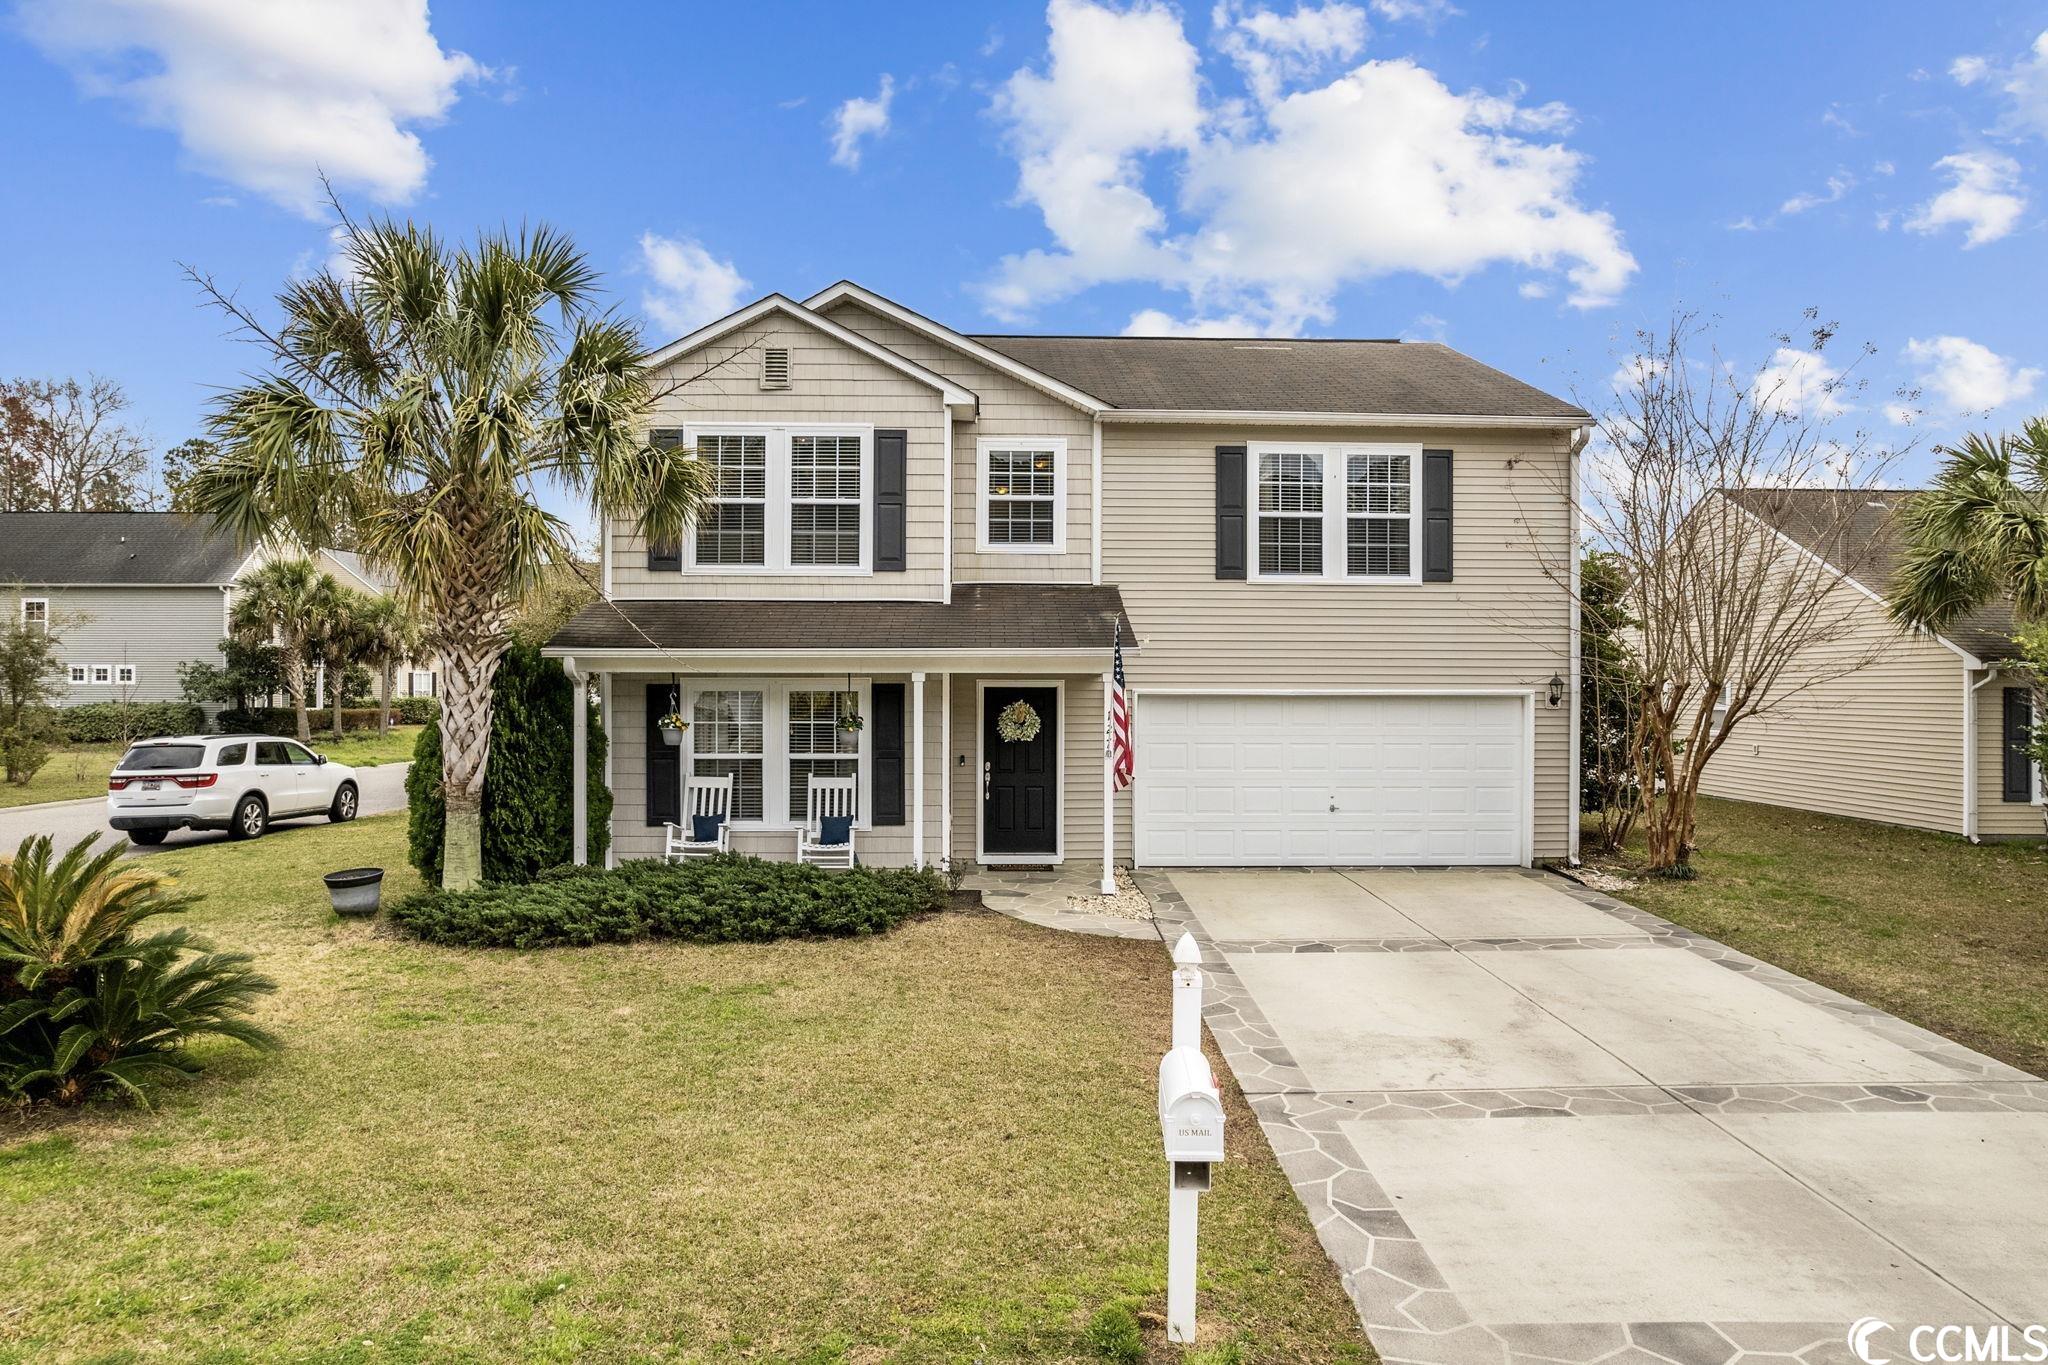 127 Weeping Willow Dr. Myrtle Beach, SC 29579